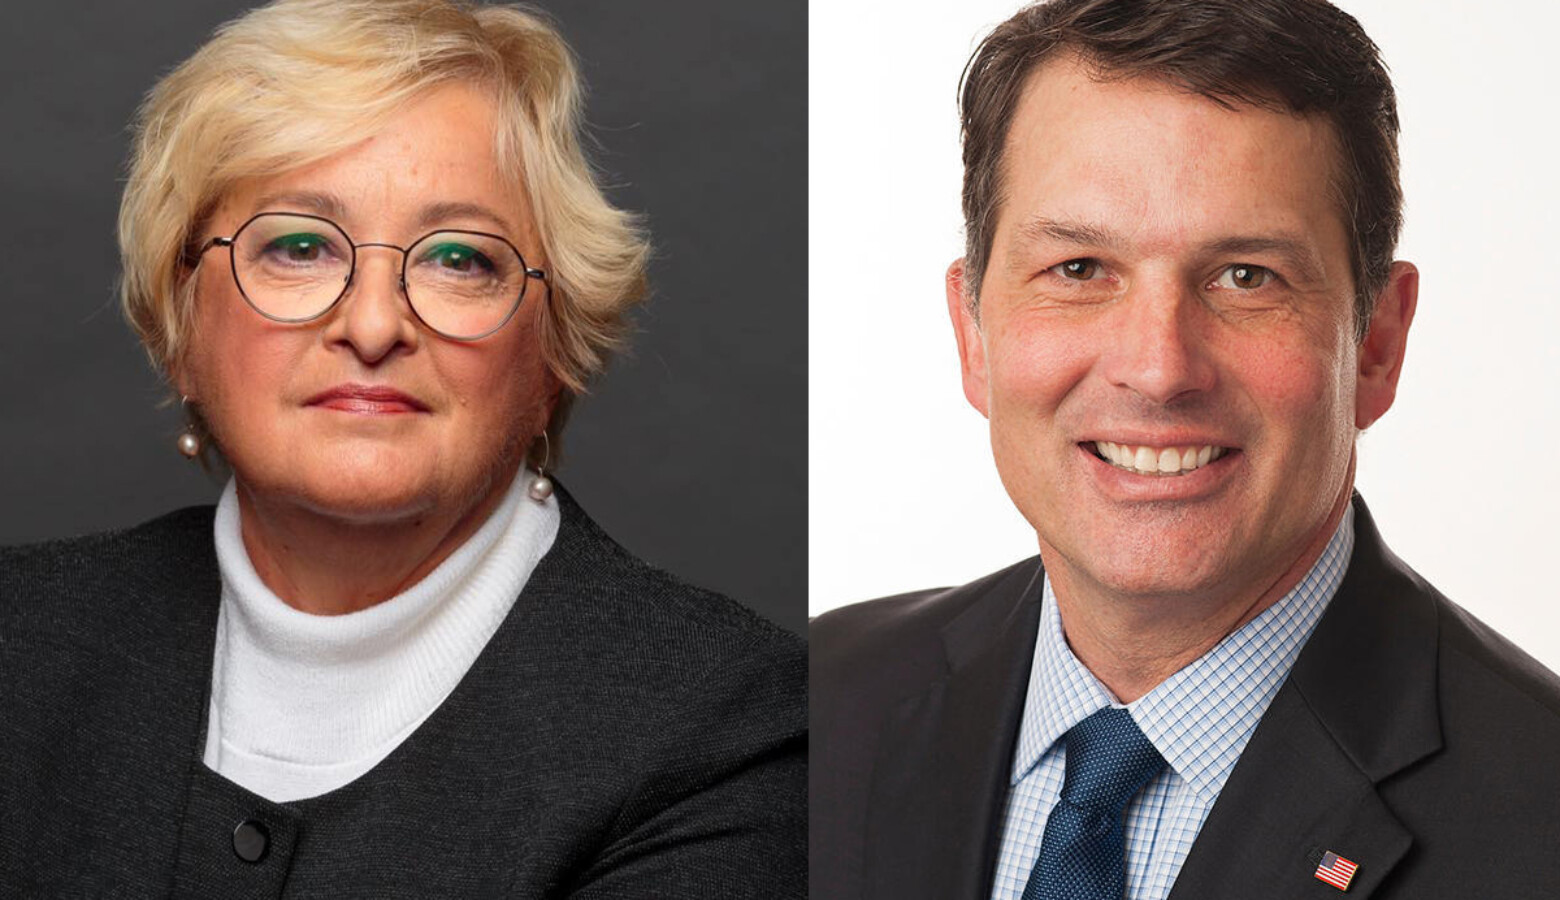 Sen. Karen Tallian (D-Ogden Dunes), left, and former Evansville Mayor Jonathan Weinzapfel are Indiana Democrats' candidates for Attorney General. (Courtesy of the Tallian and Weinzapfel campaigns)